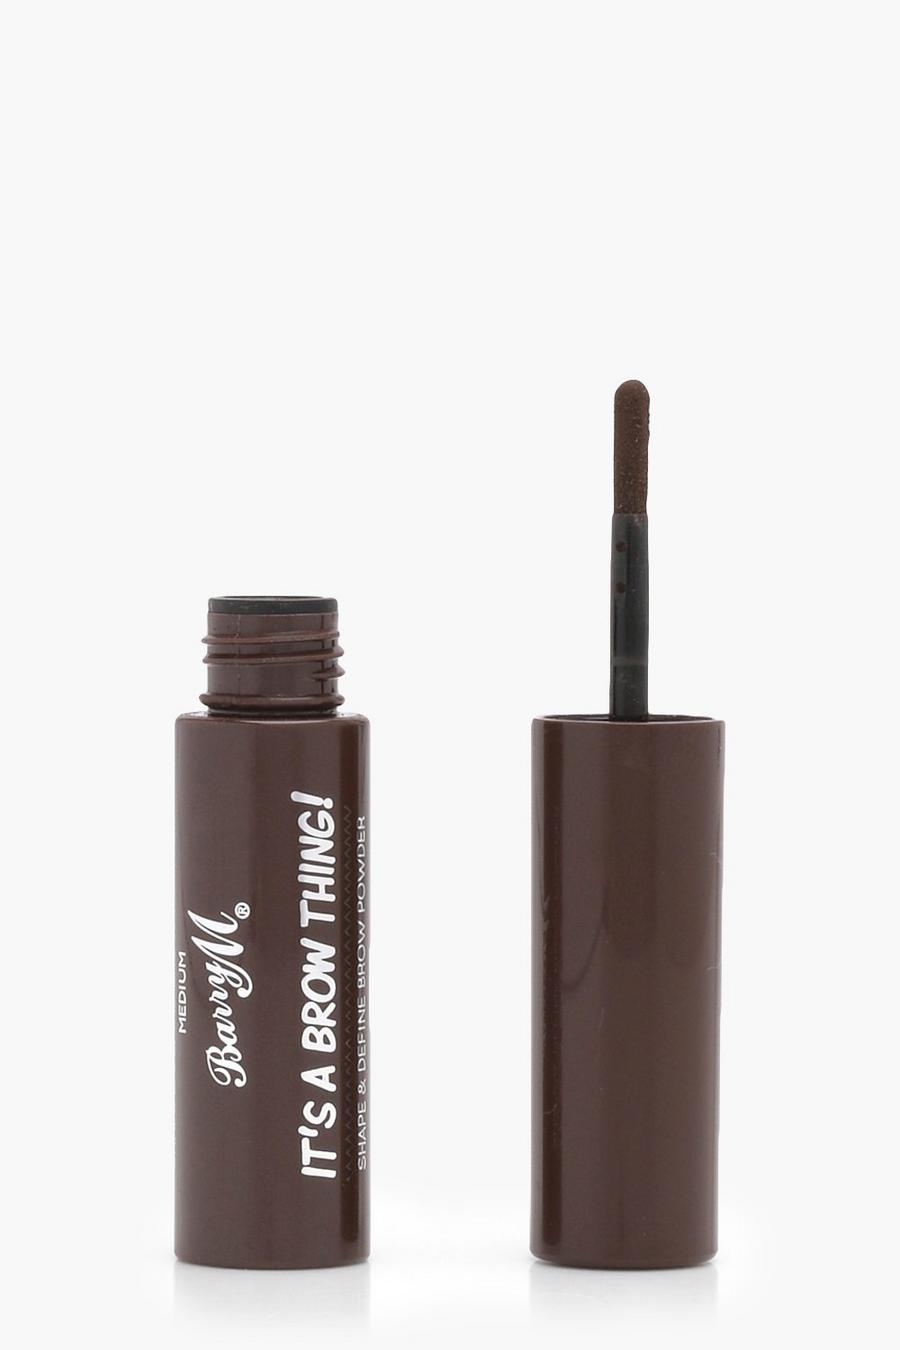 Barry M It’s A Brow Thing Powder- Medium, Marrone medio image number 1